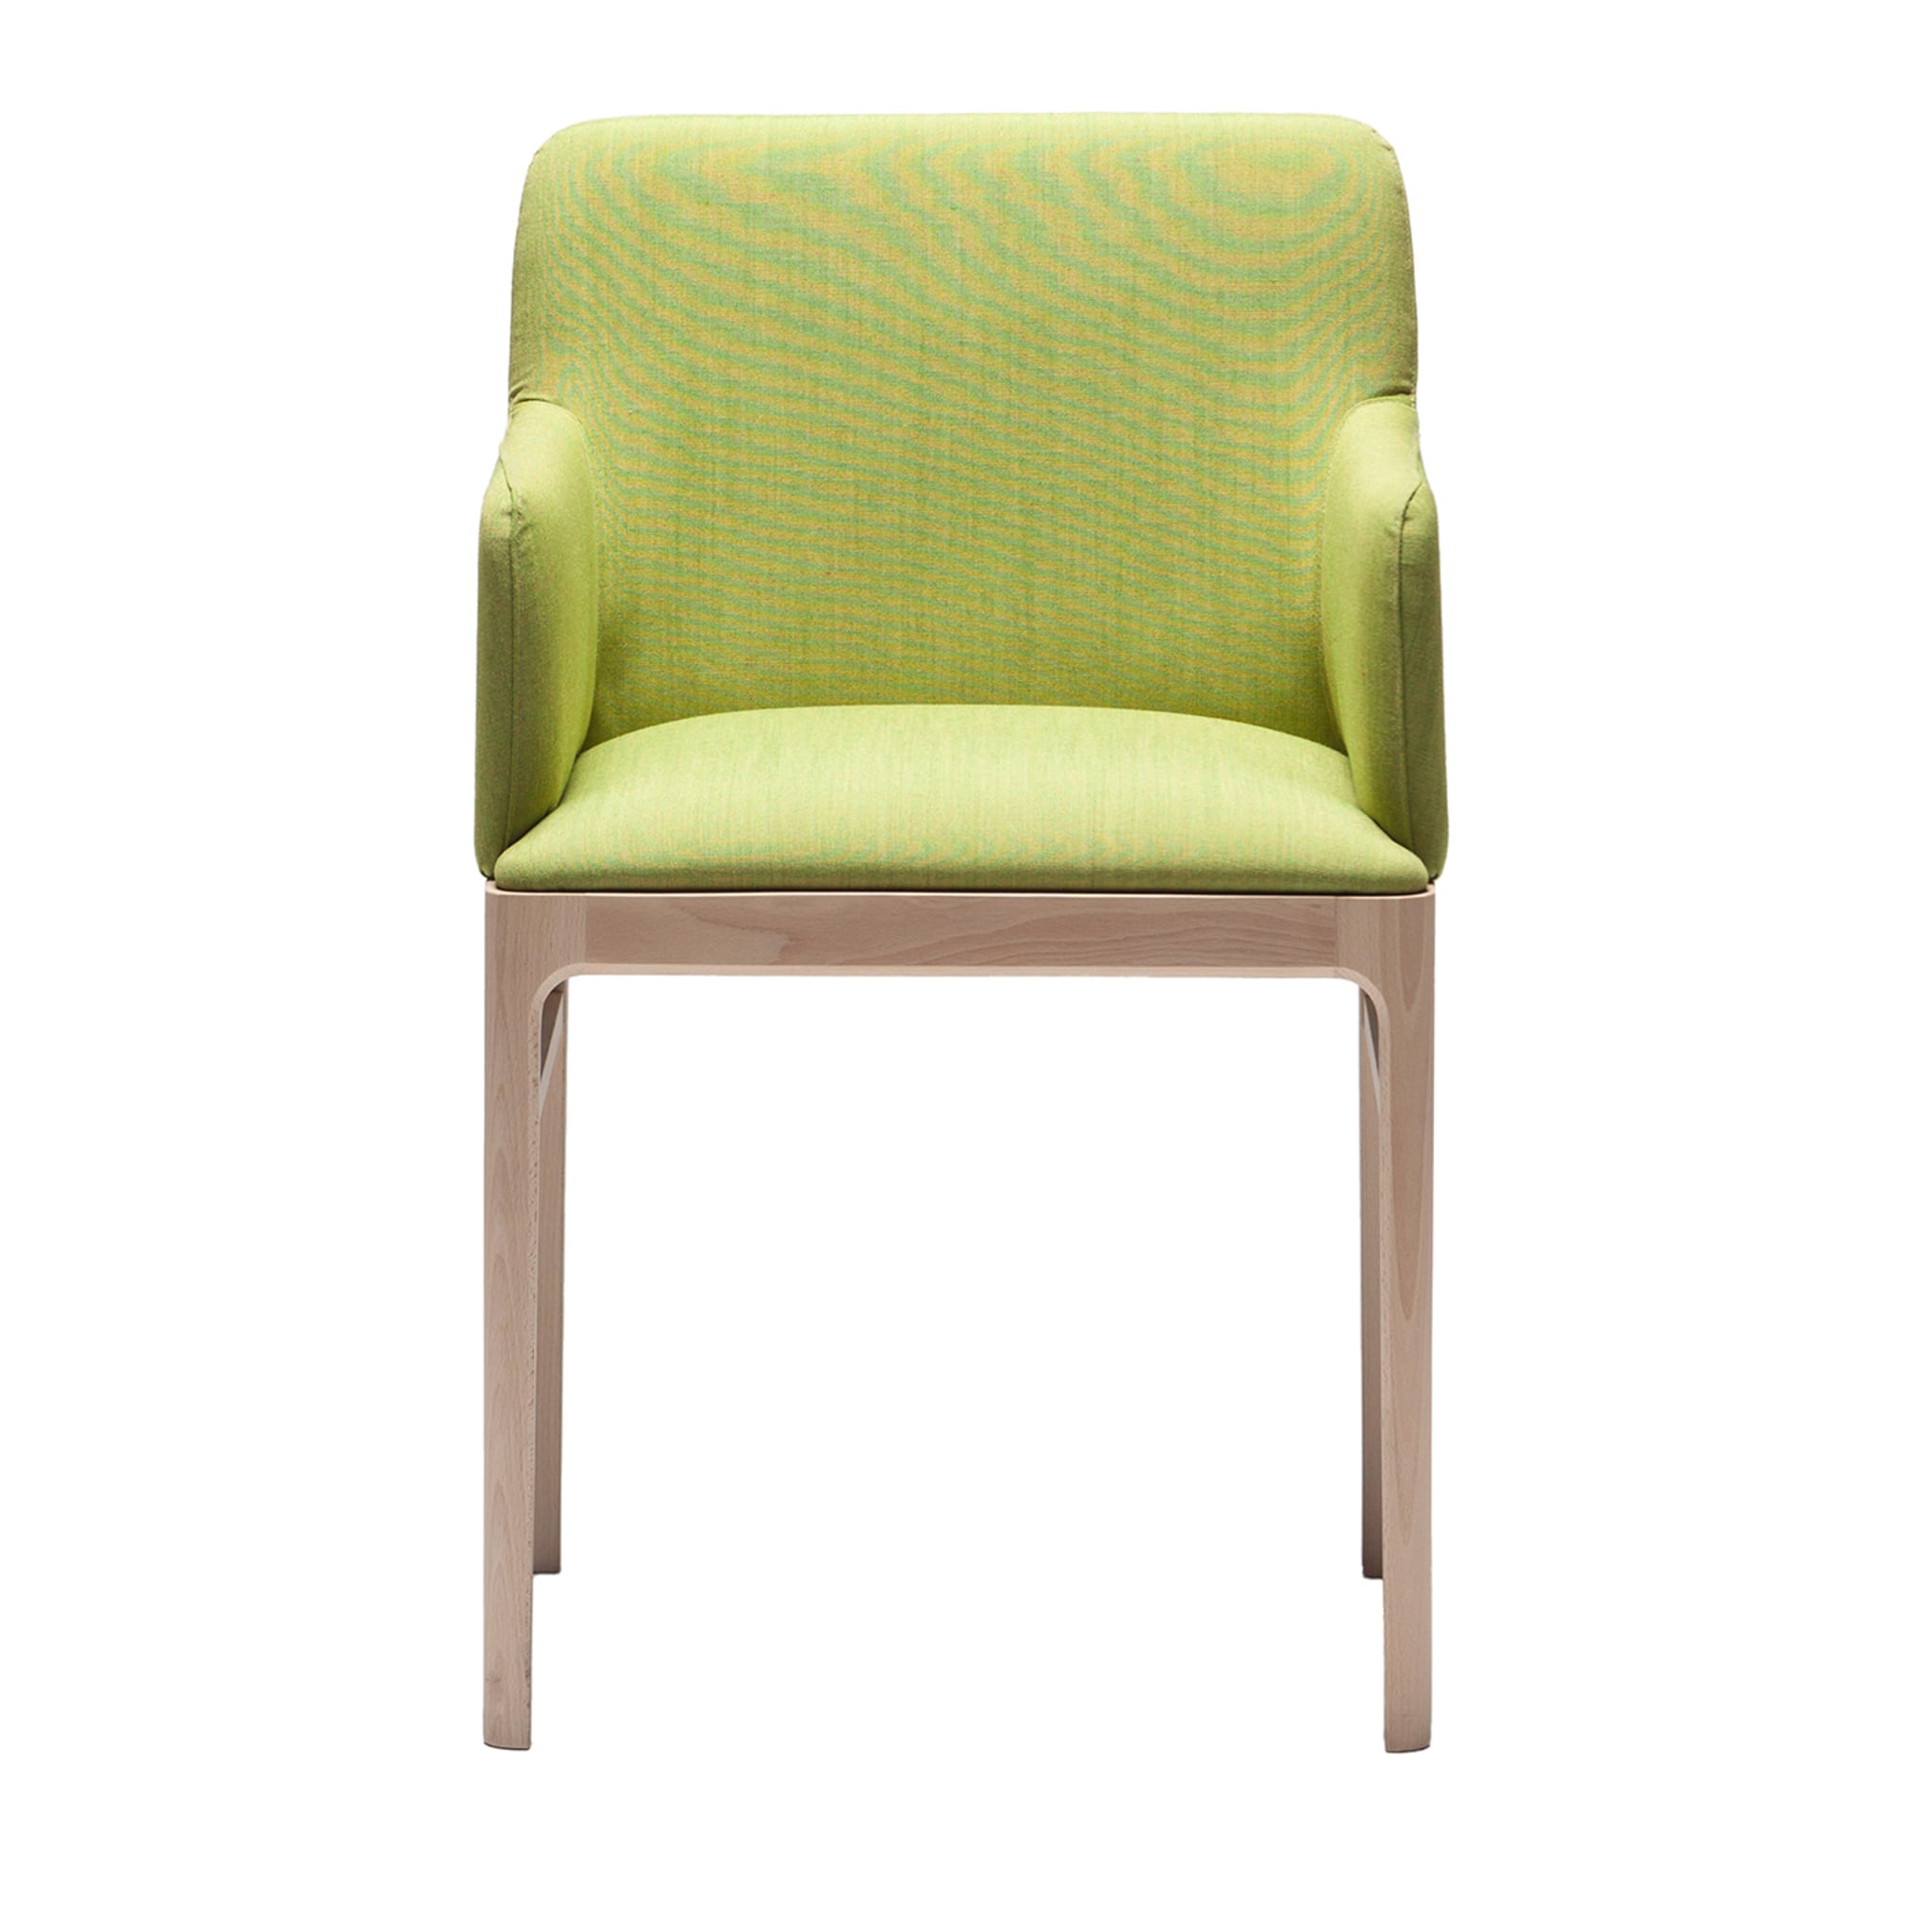 Tip Tap 381 Green Armchair by Claudio Perin - Main view